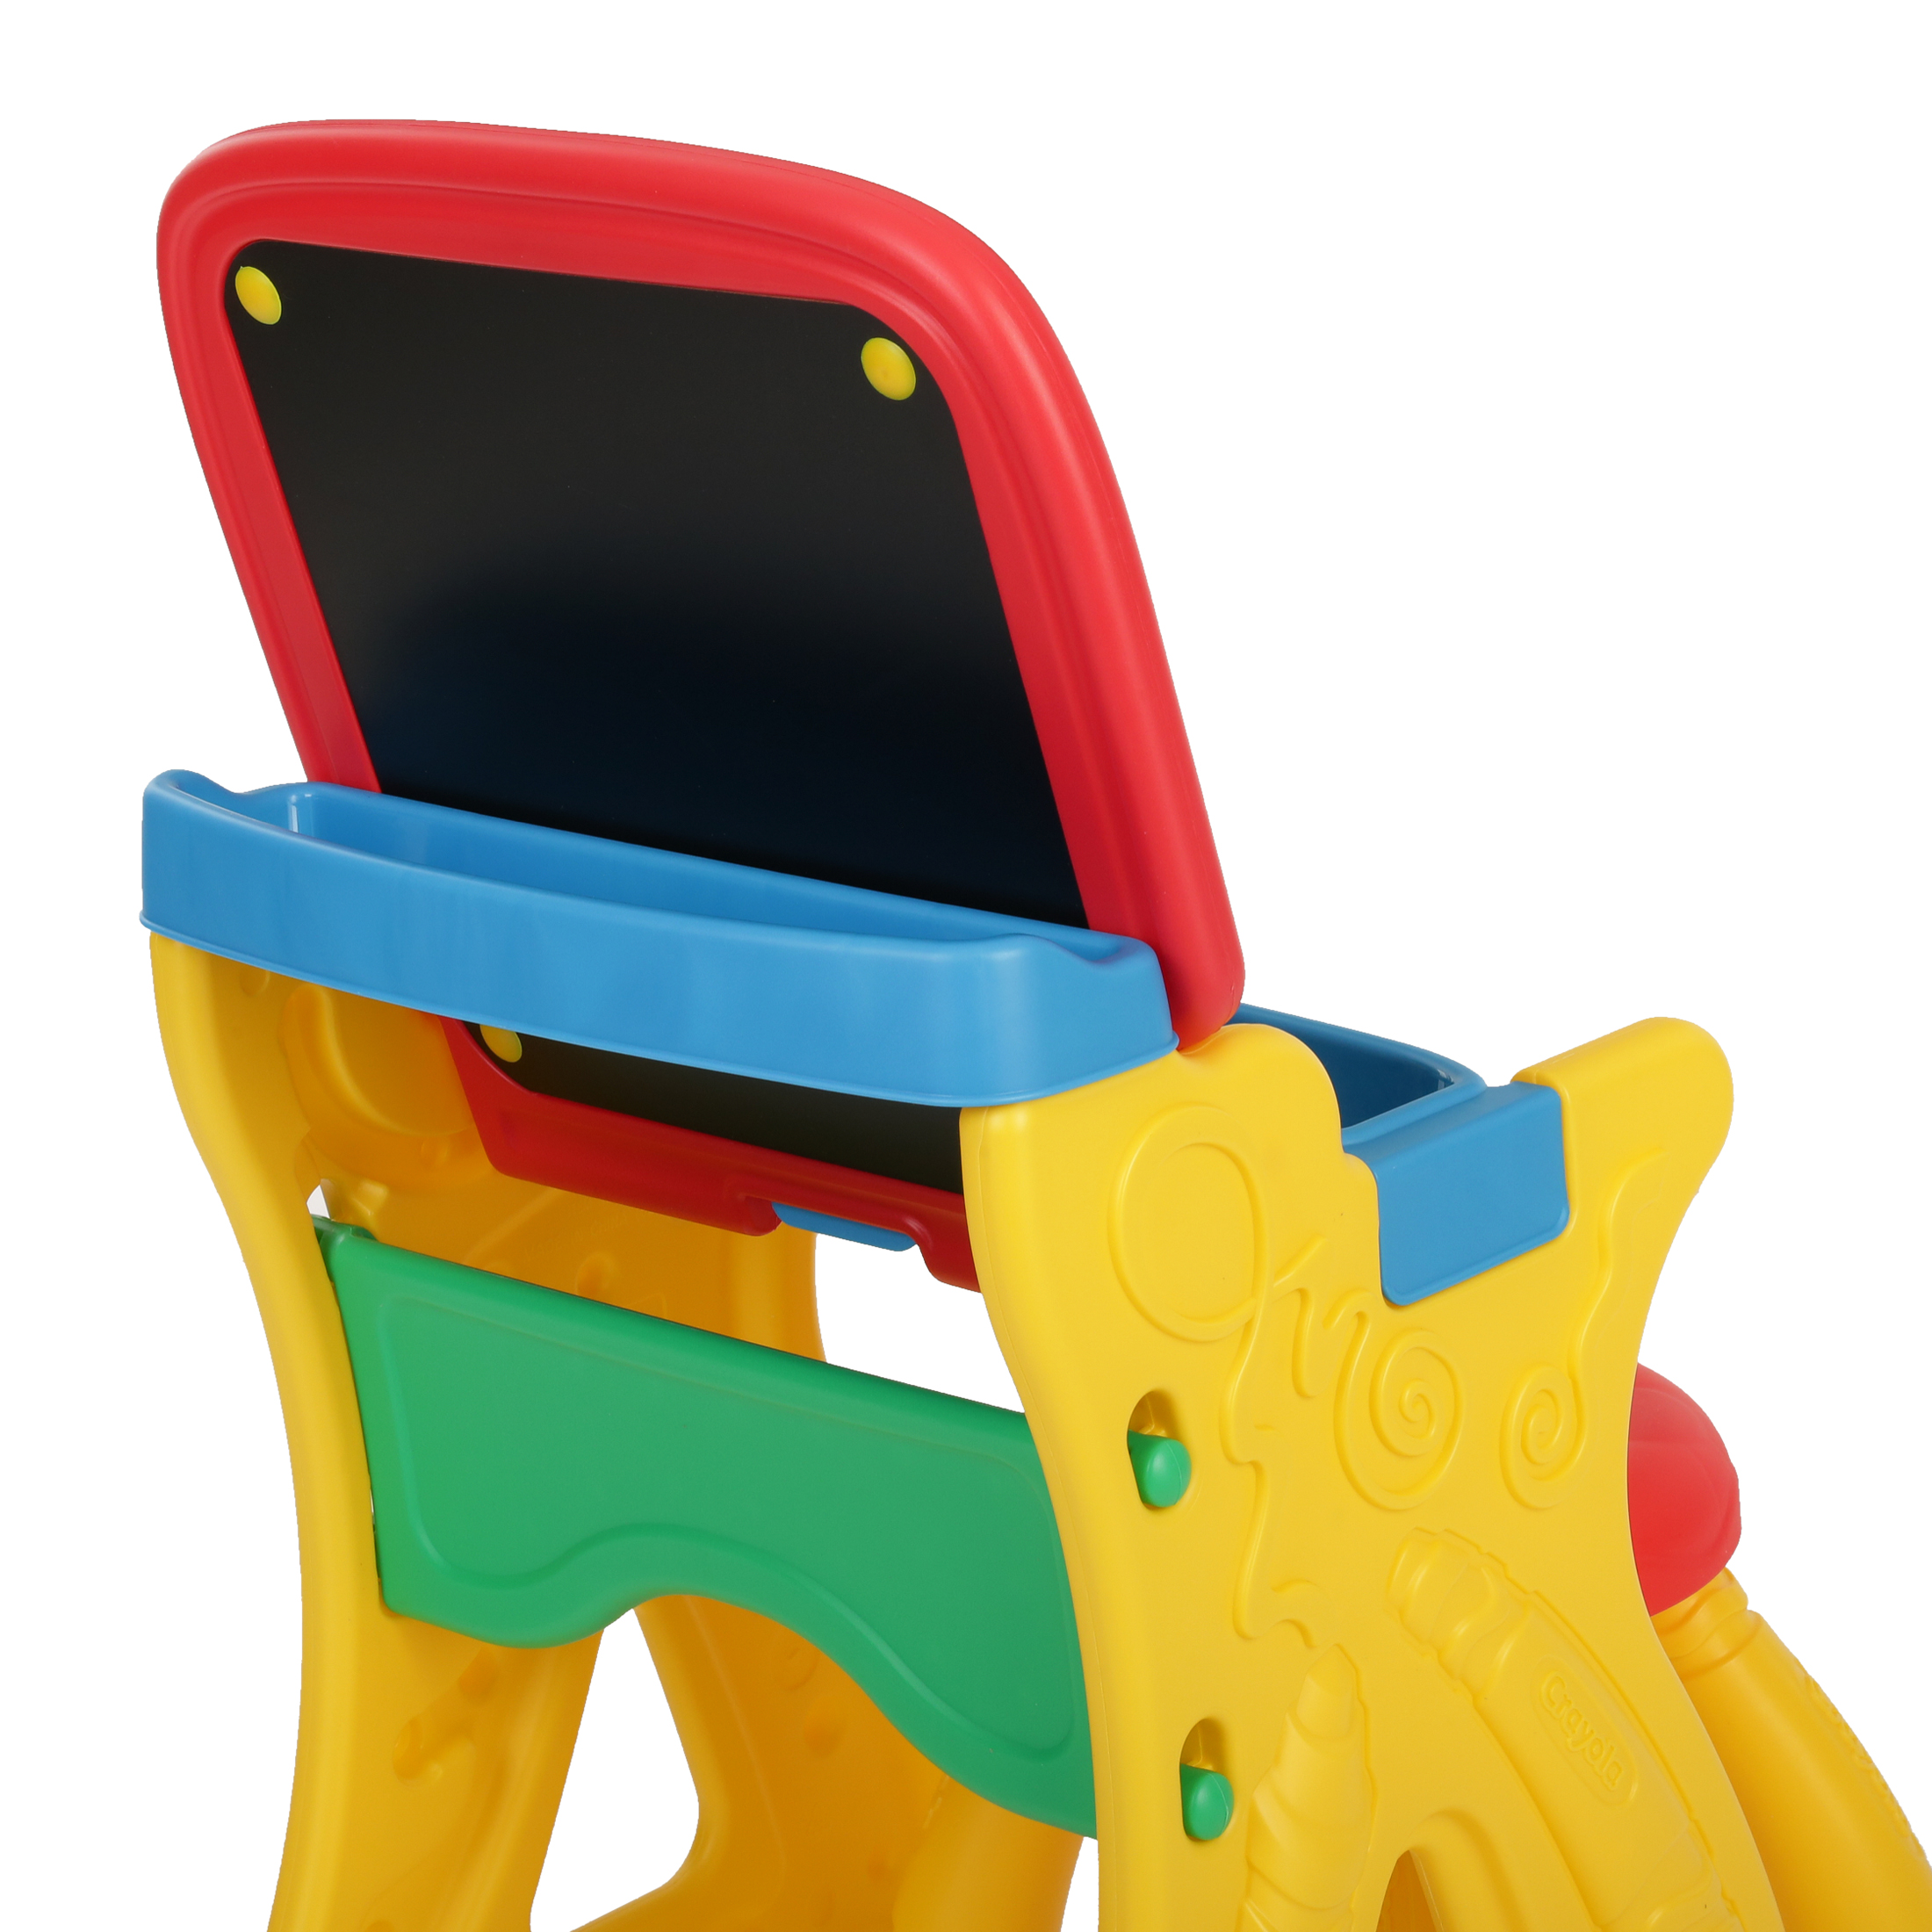 Crayola Play 'N Fold #5013 2-in-1 Art Studio Easel Desk – Recommended for Ages 3 Years and up - Multi in Color - image 4 of 12